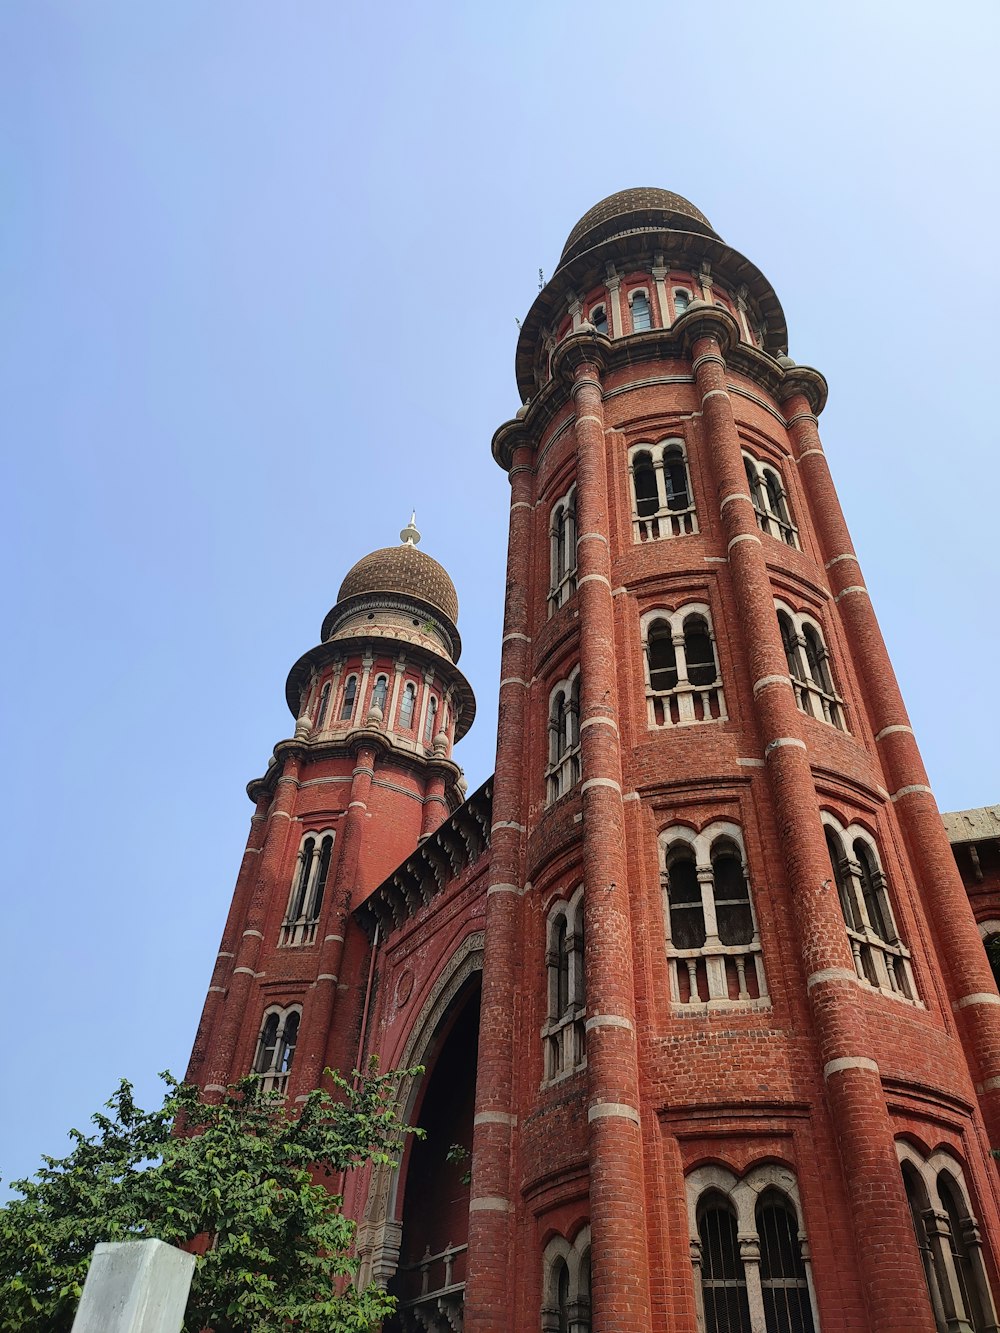 a large red brick building with two towers